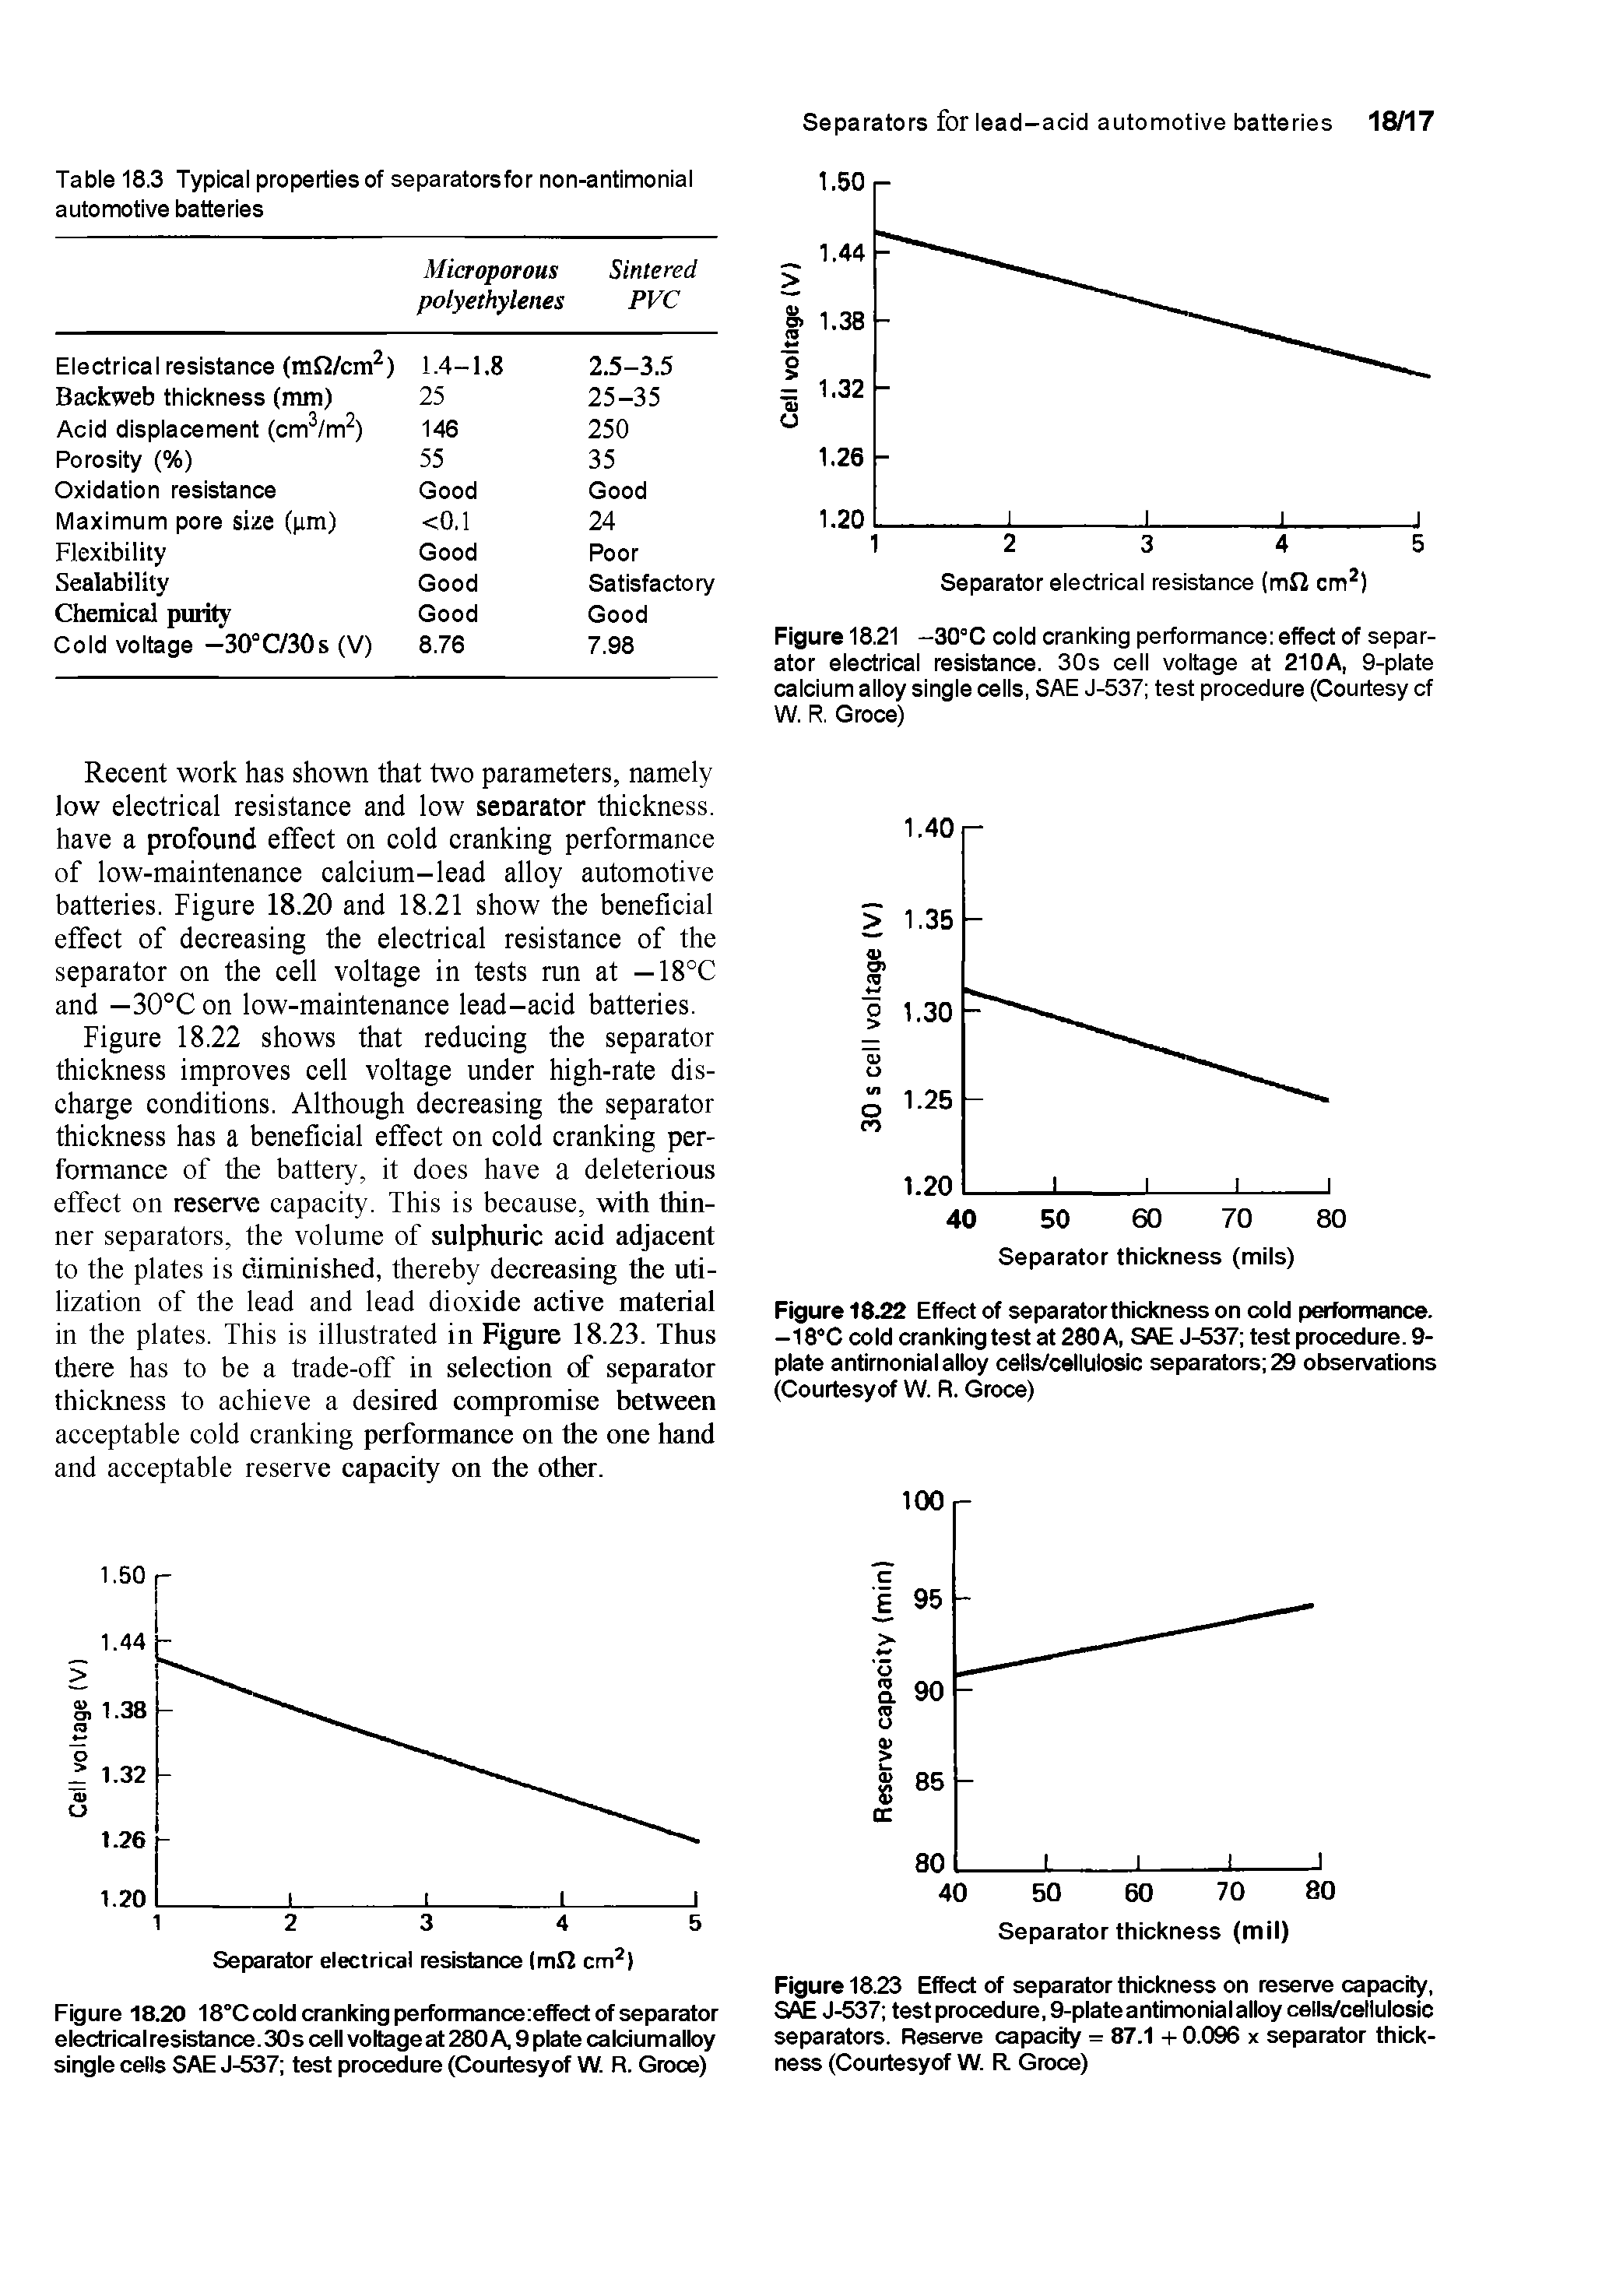 Figure 18.22 shows that reducing the separator thickness improves cell voltage under high-rate discharge conditions. Although decreasing the separator thickness has a beneficial effect on cold cranking performance of the battery, it does have a deleterious effect on reserve capacity. This is because, with thinner separators, the volume of sulphuric acid adjacent to the plates is diminished, thereby decreasing the utilization of the lead and lead dioxide active material in the plates. This is illustrated in Figure 18.23. Thus there has to be a trade-off in selection of separator thickness to achieve a desired compromise between acceptable cold cranking performance on the one hand and acceptable reserve capacity on the other.